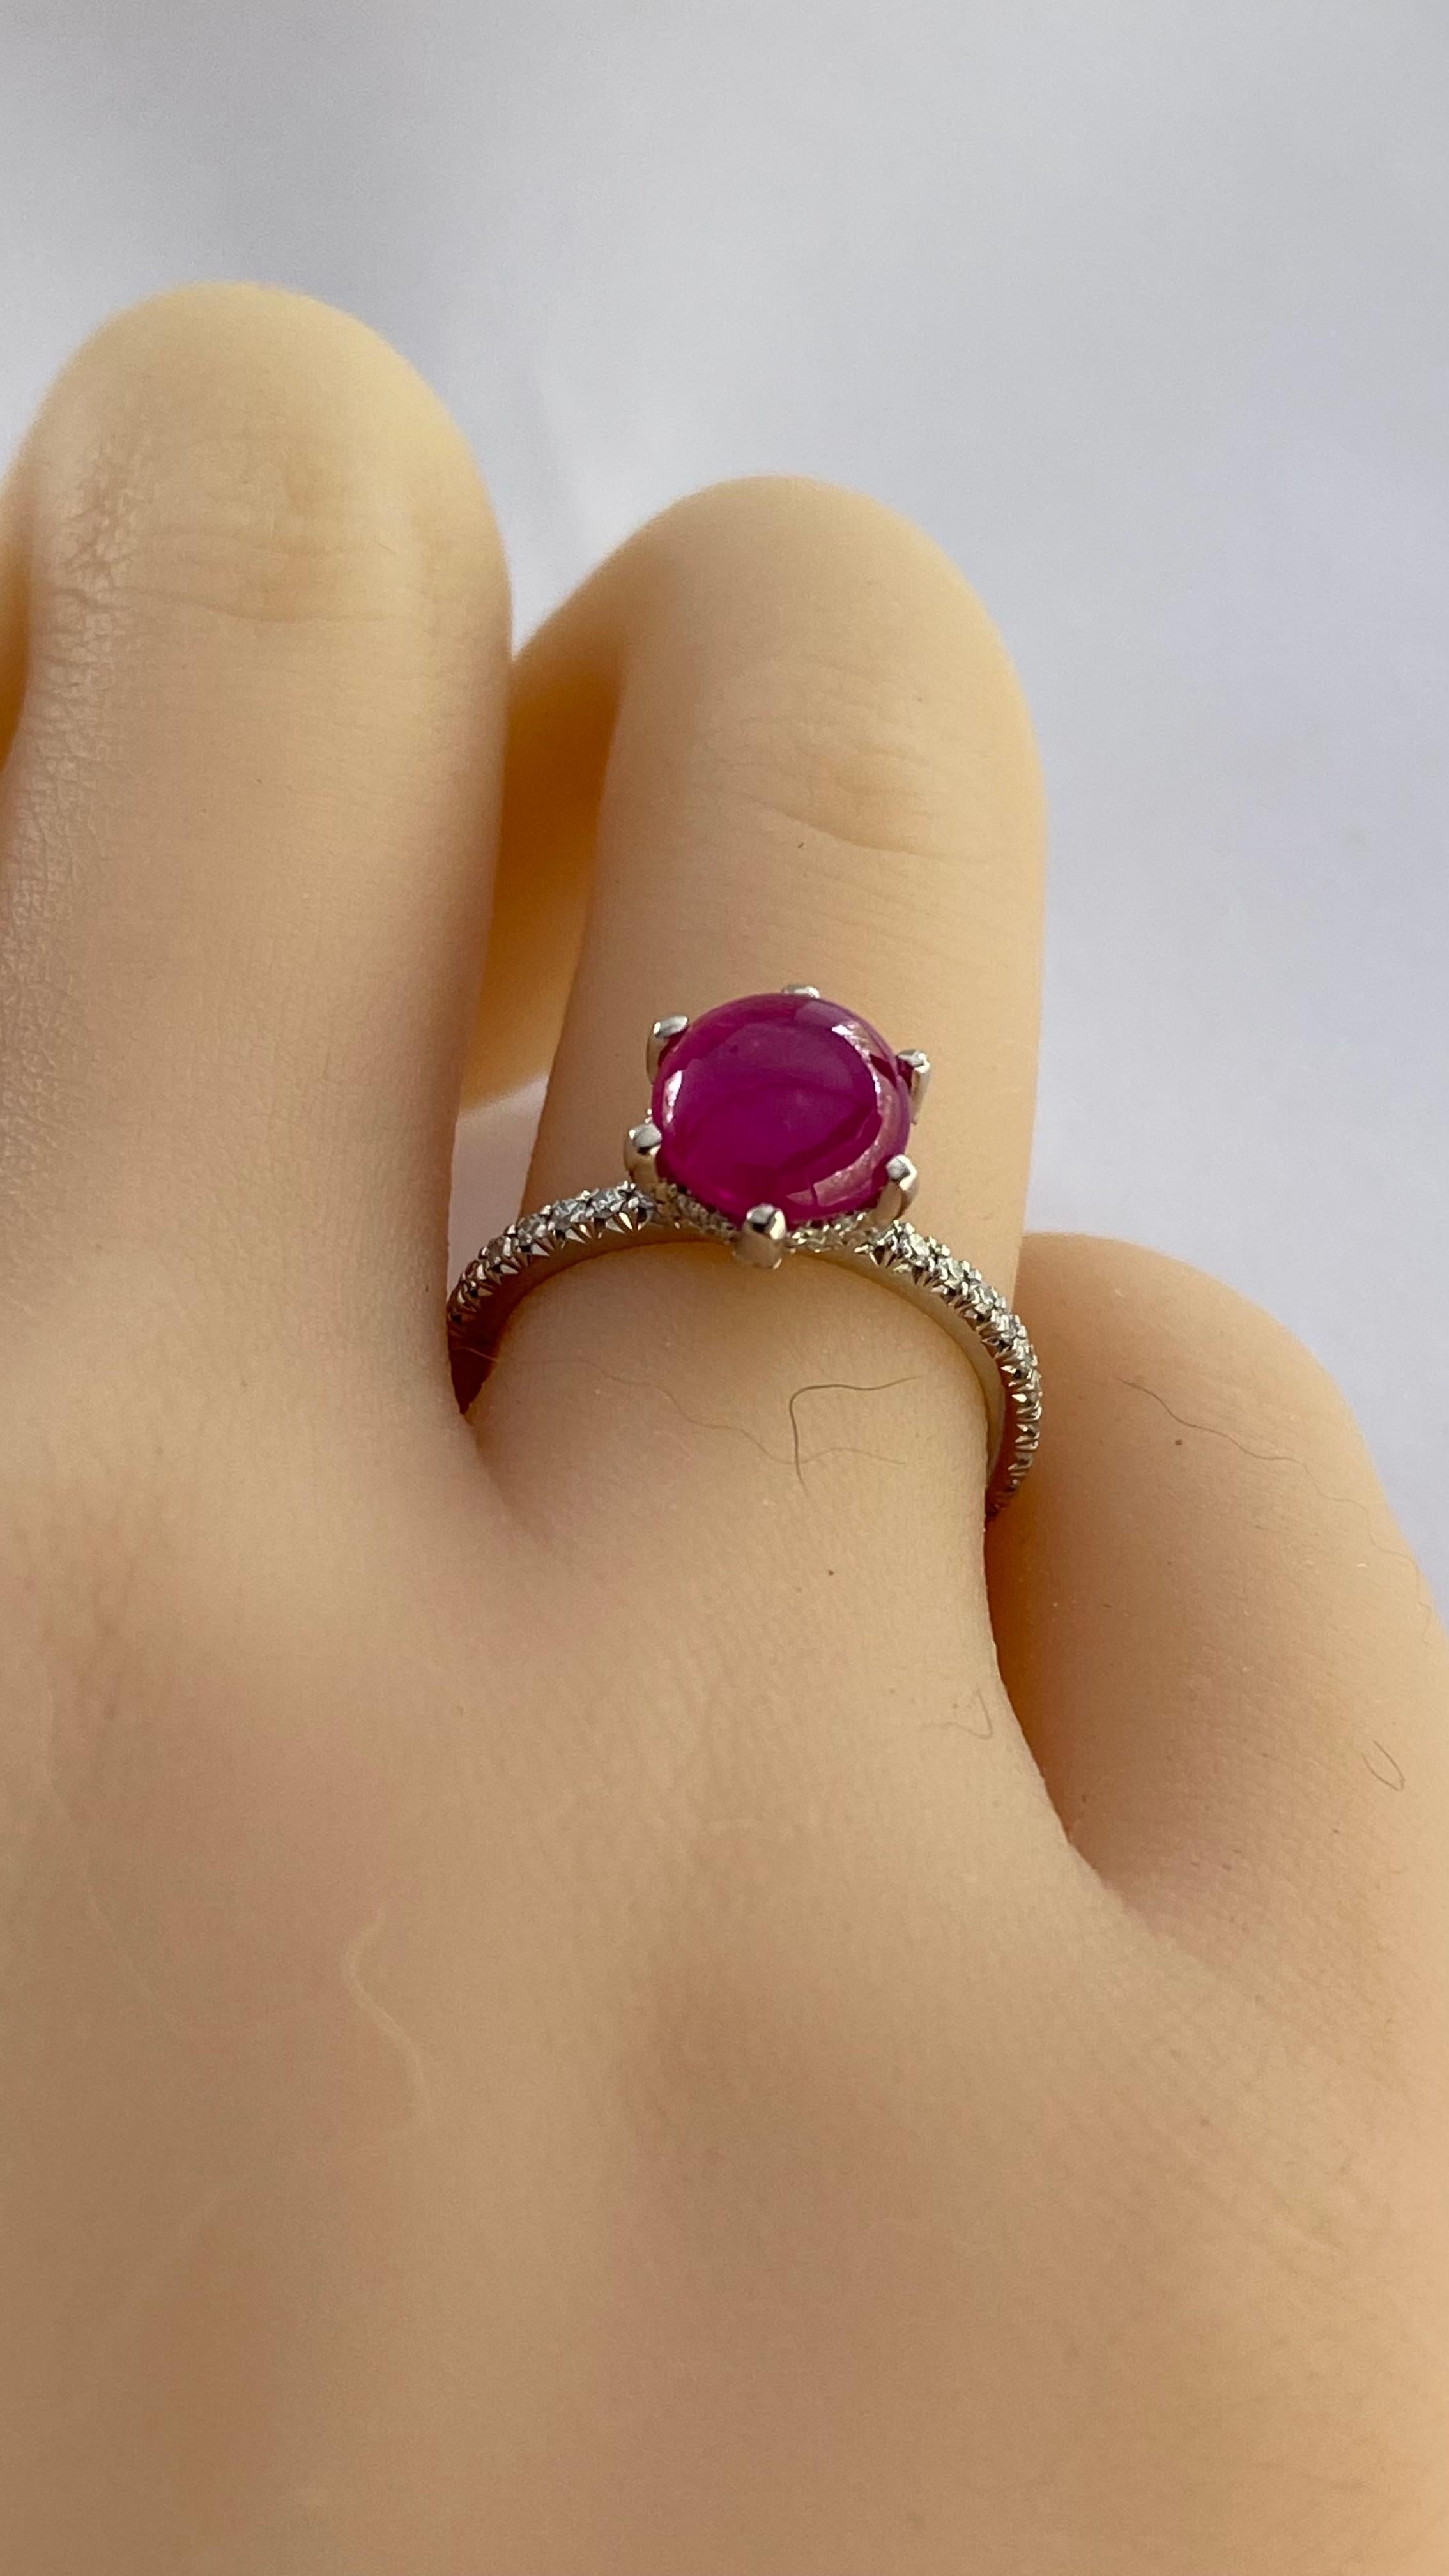 Exquisite Vintage Blue Nile Platinum Diamond and Ruby 2.75 Carat Engagement Ring For Sale 2